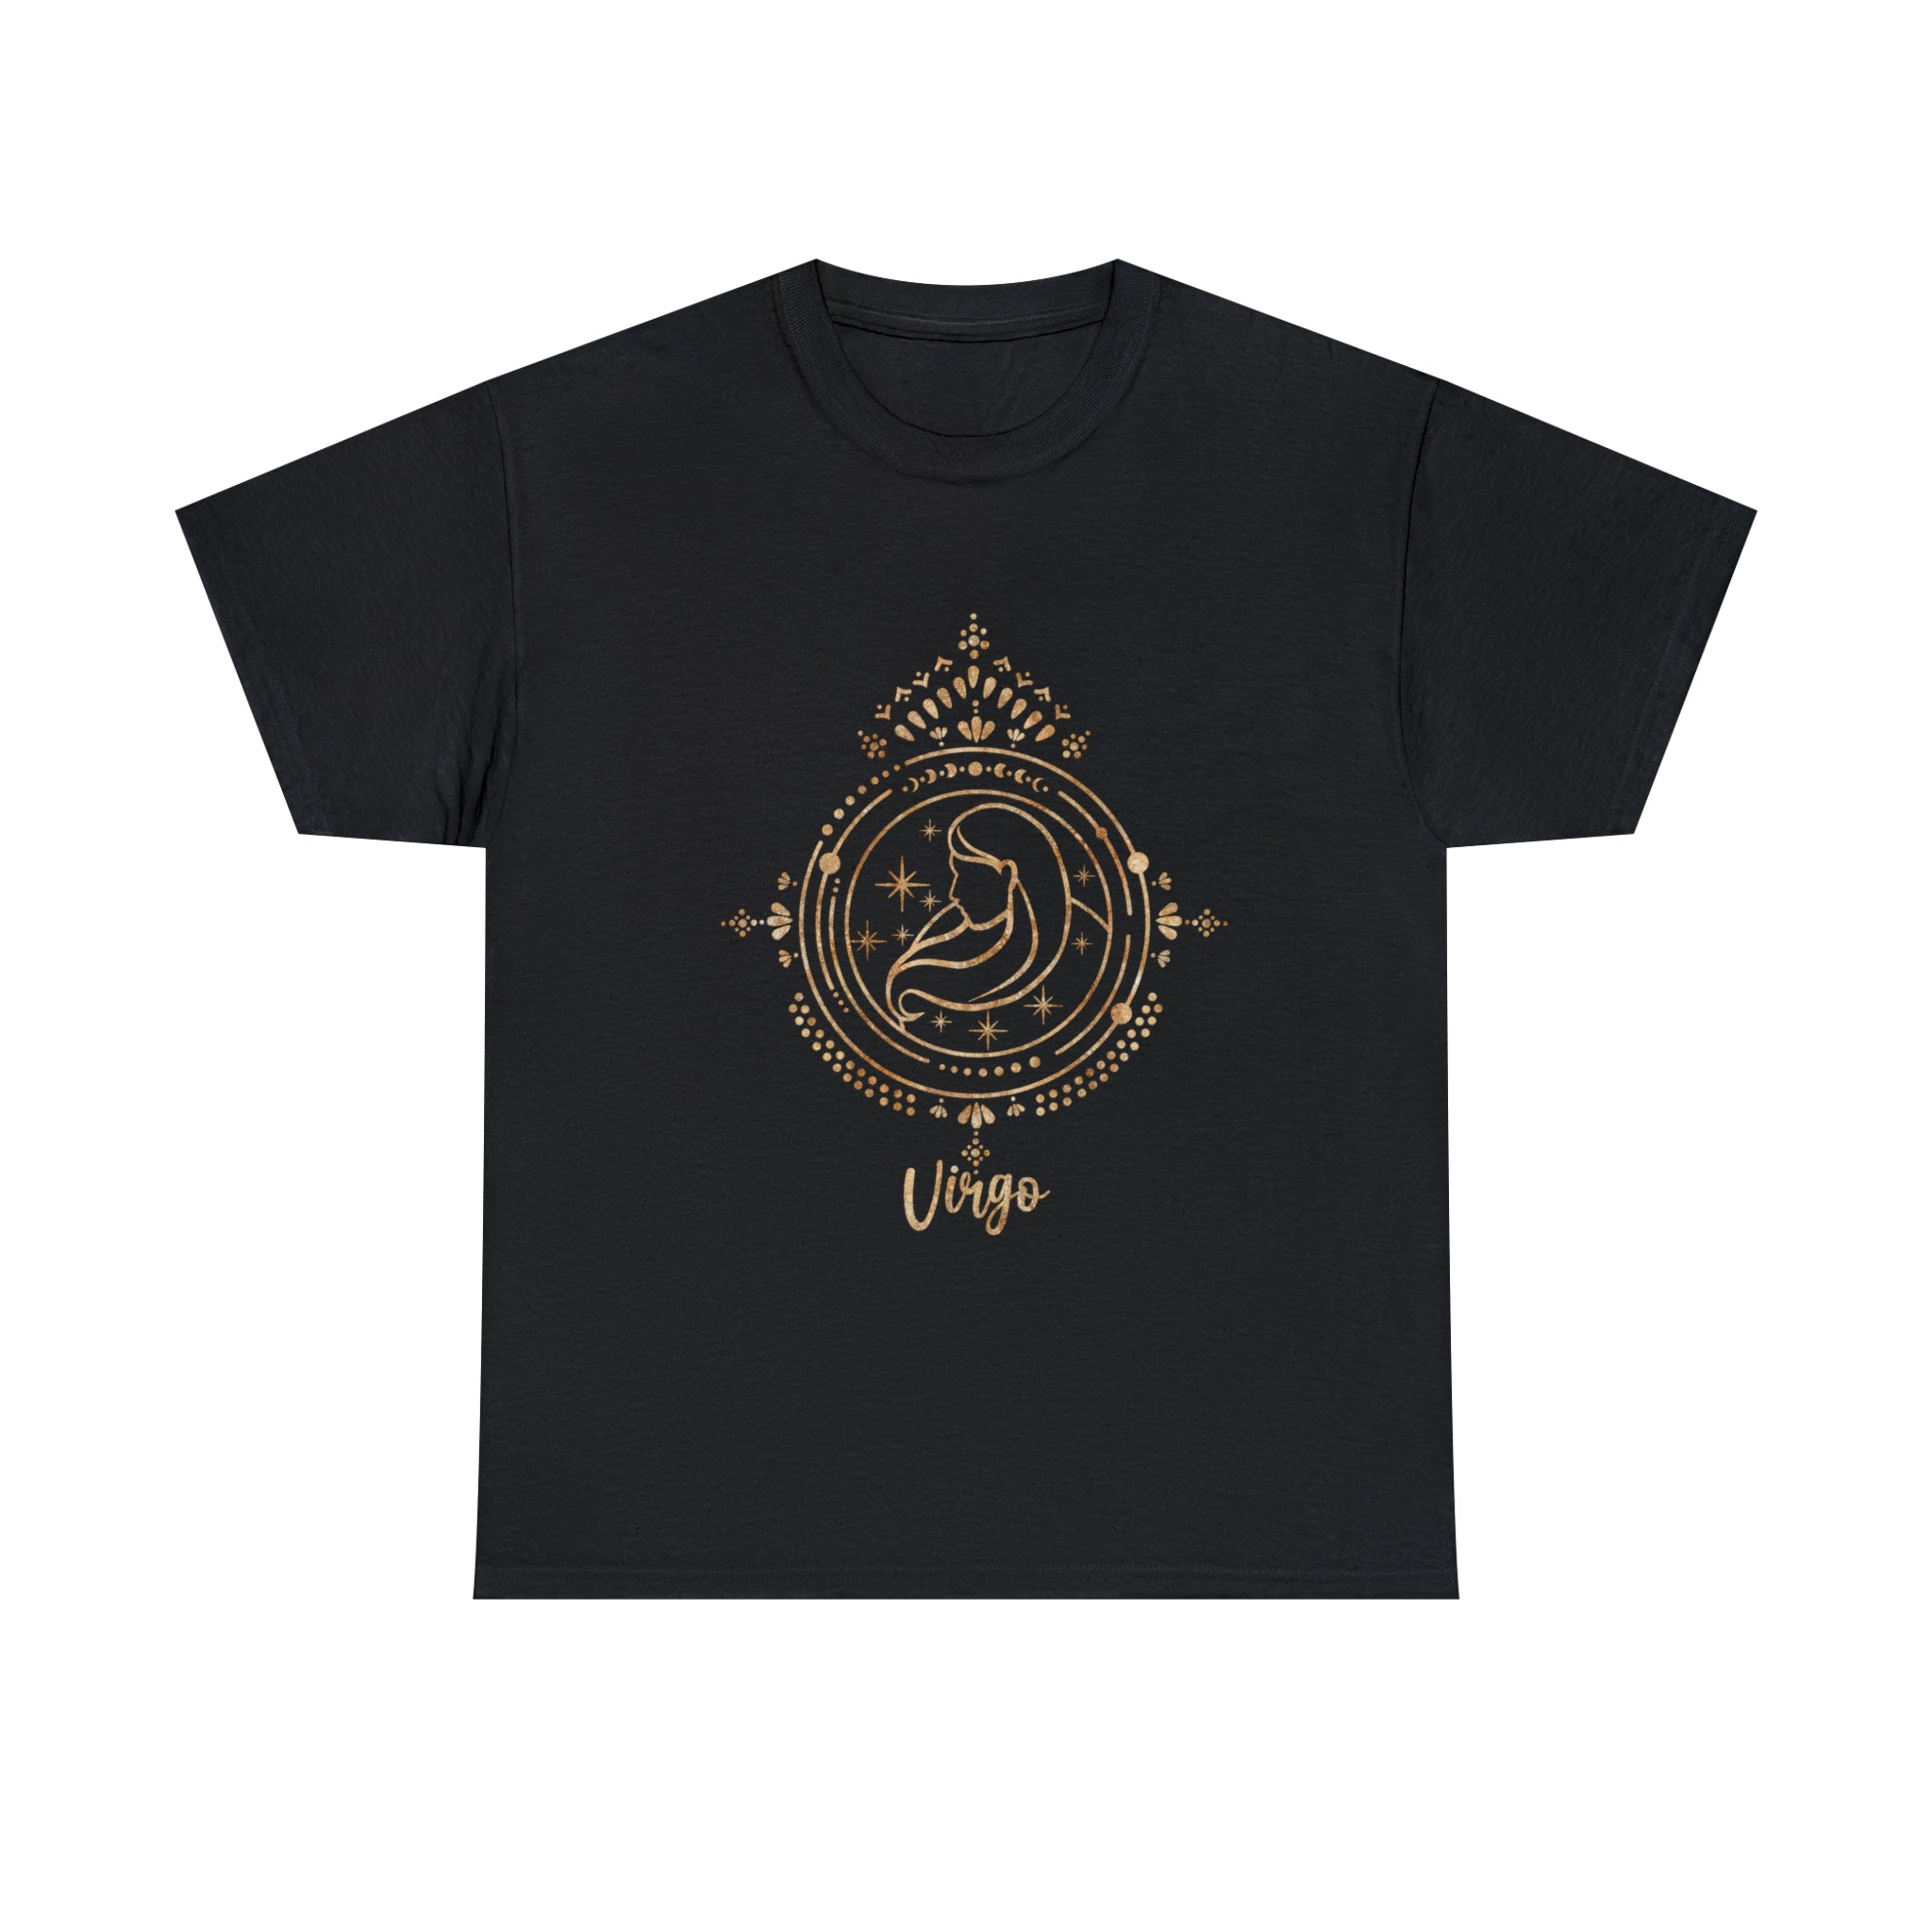 A black Virgo T-Shirt featuring an organized and helpful image of a crescent moon.